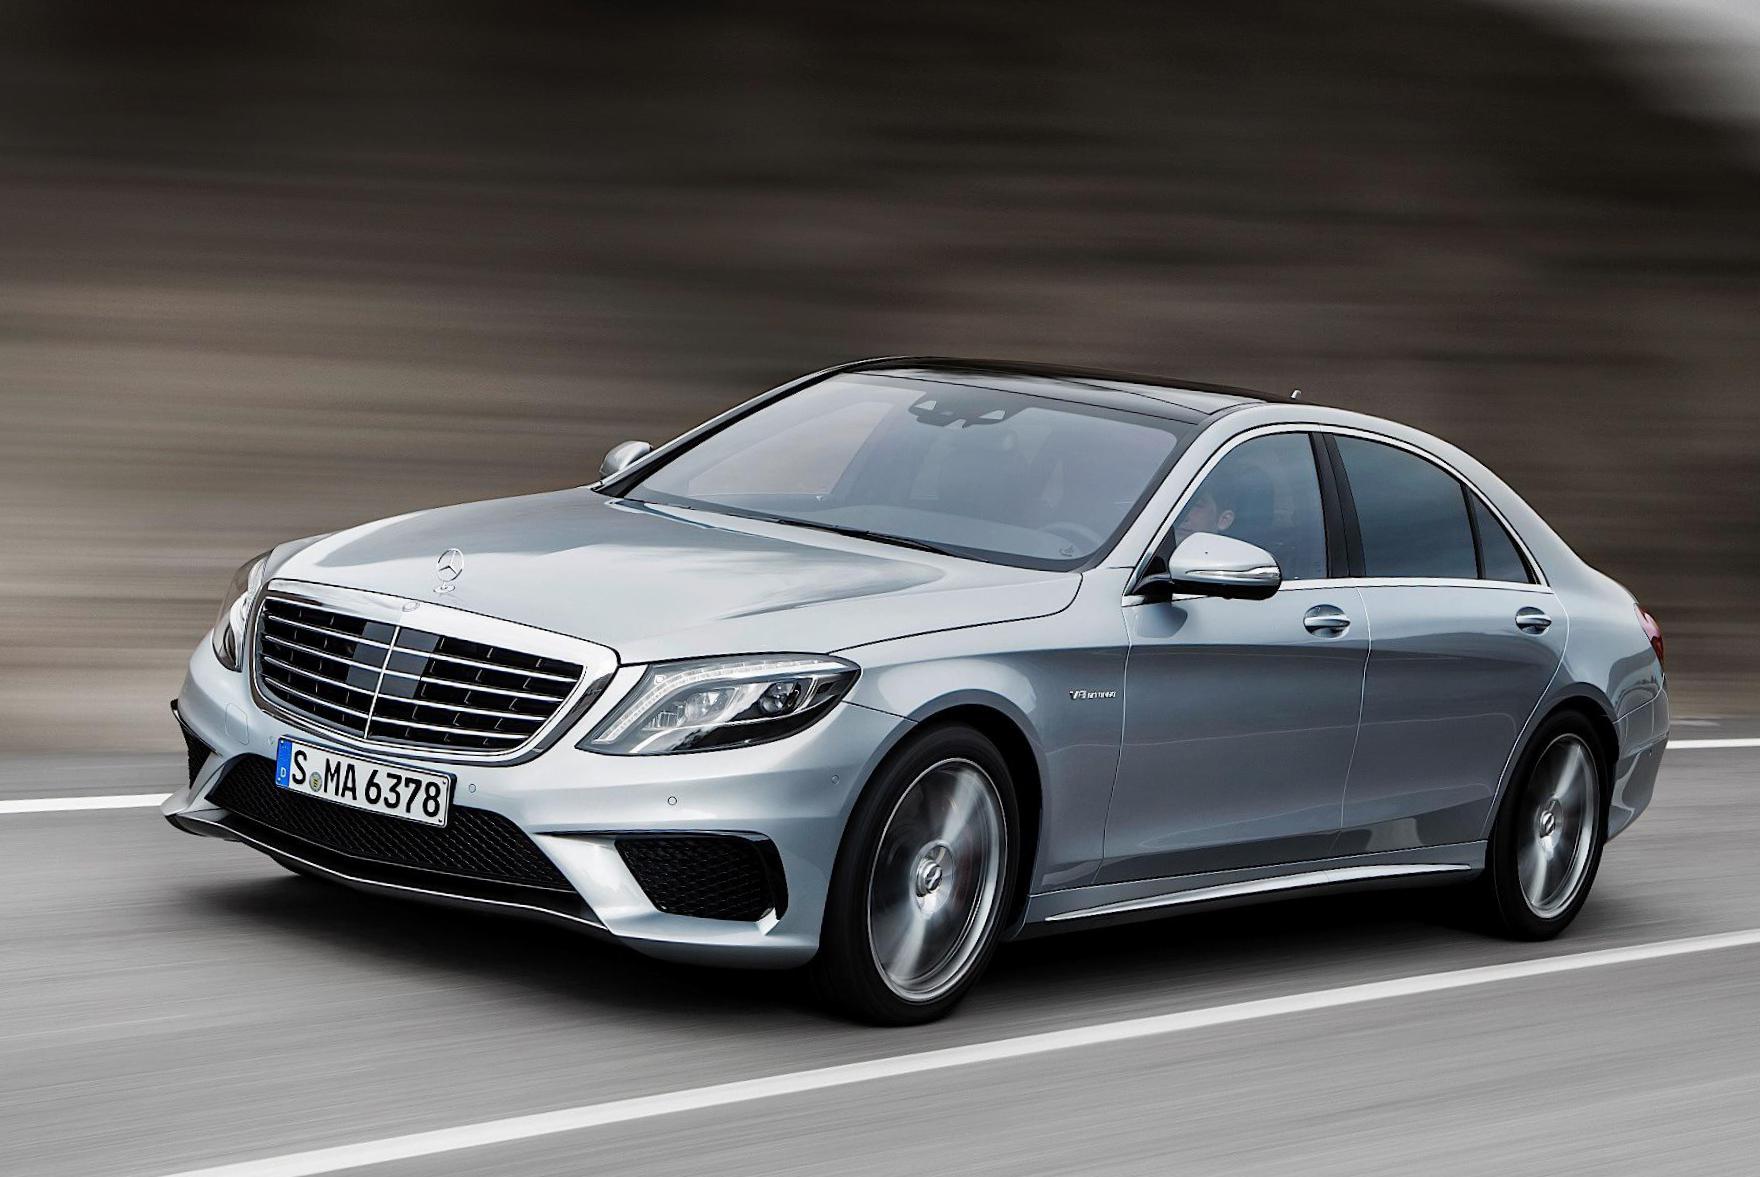 Mercedes S-Class (W222) Photos and Specs. Photo: S-Class (W222